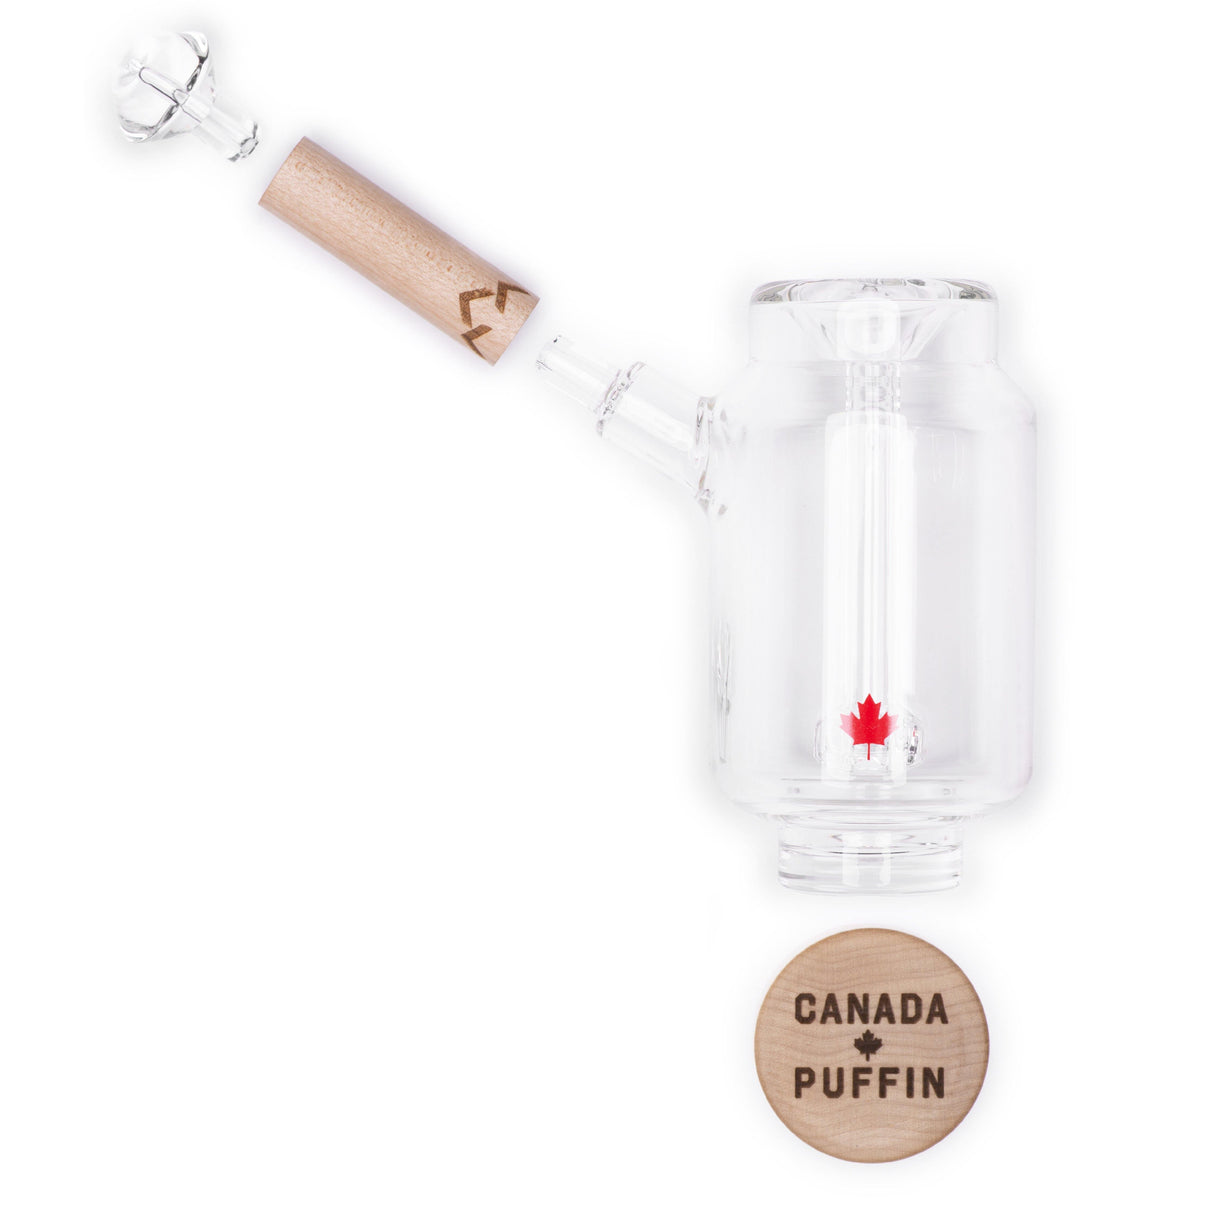 Canada Puffin Arctic Bubbler - Clear Glass with Maple Leaf Emblem